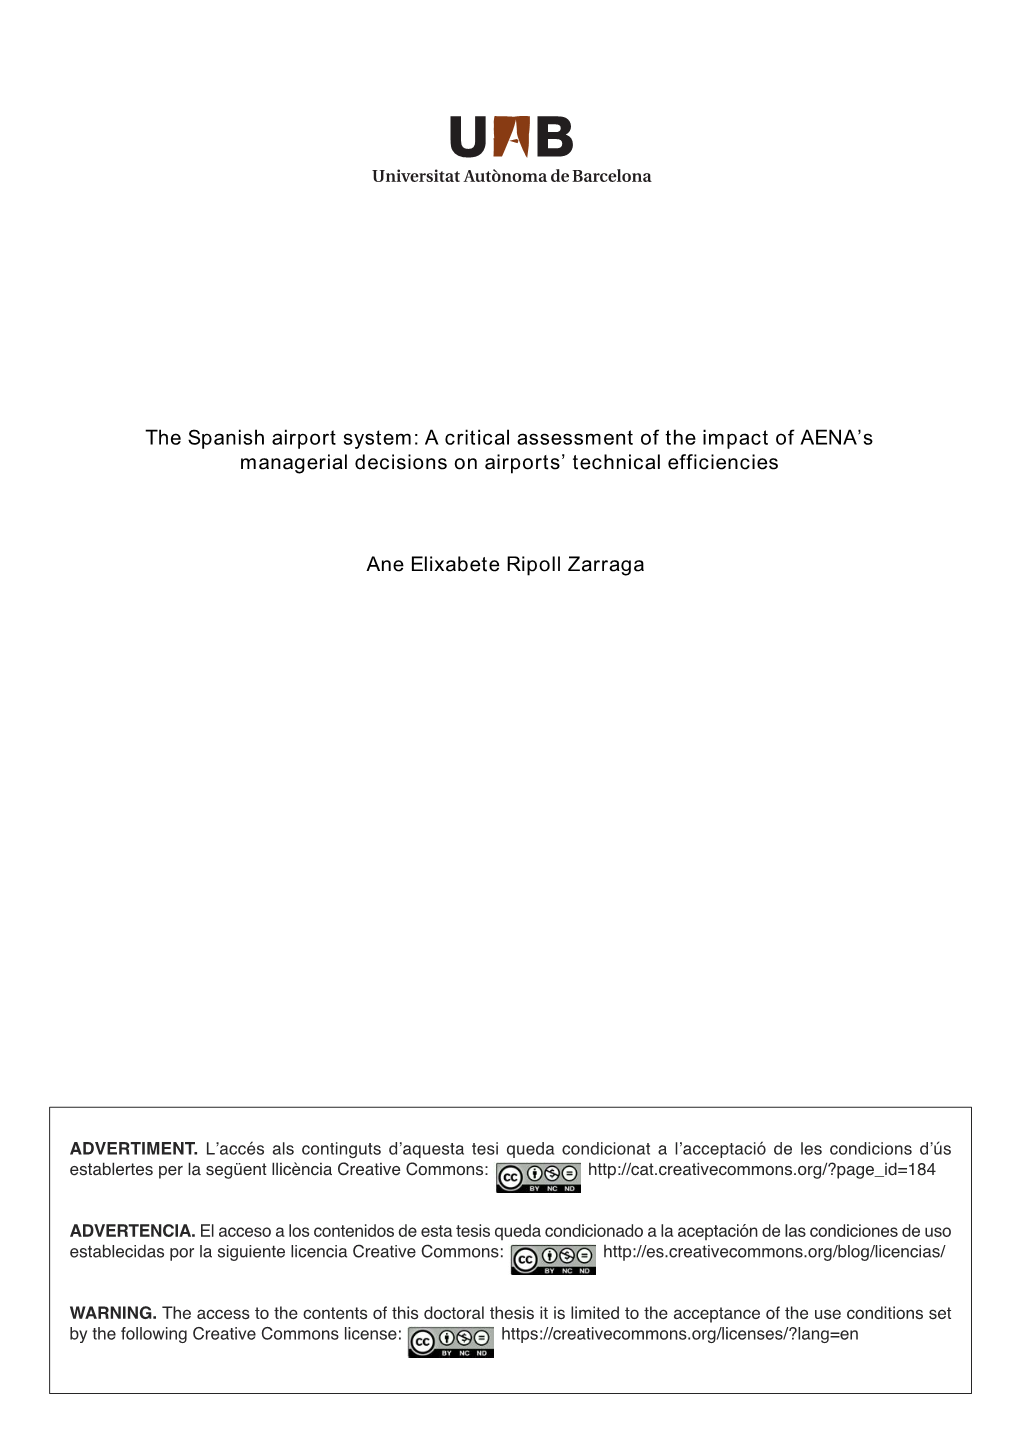 The Spanish Airport System: a Critical Assessment of the Impact of AENA’S Managerial Decisions on Airports’ Technical Efficiencies